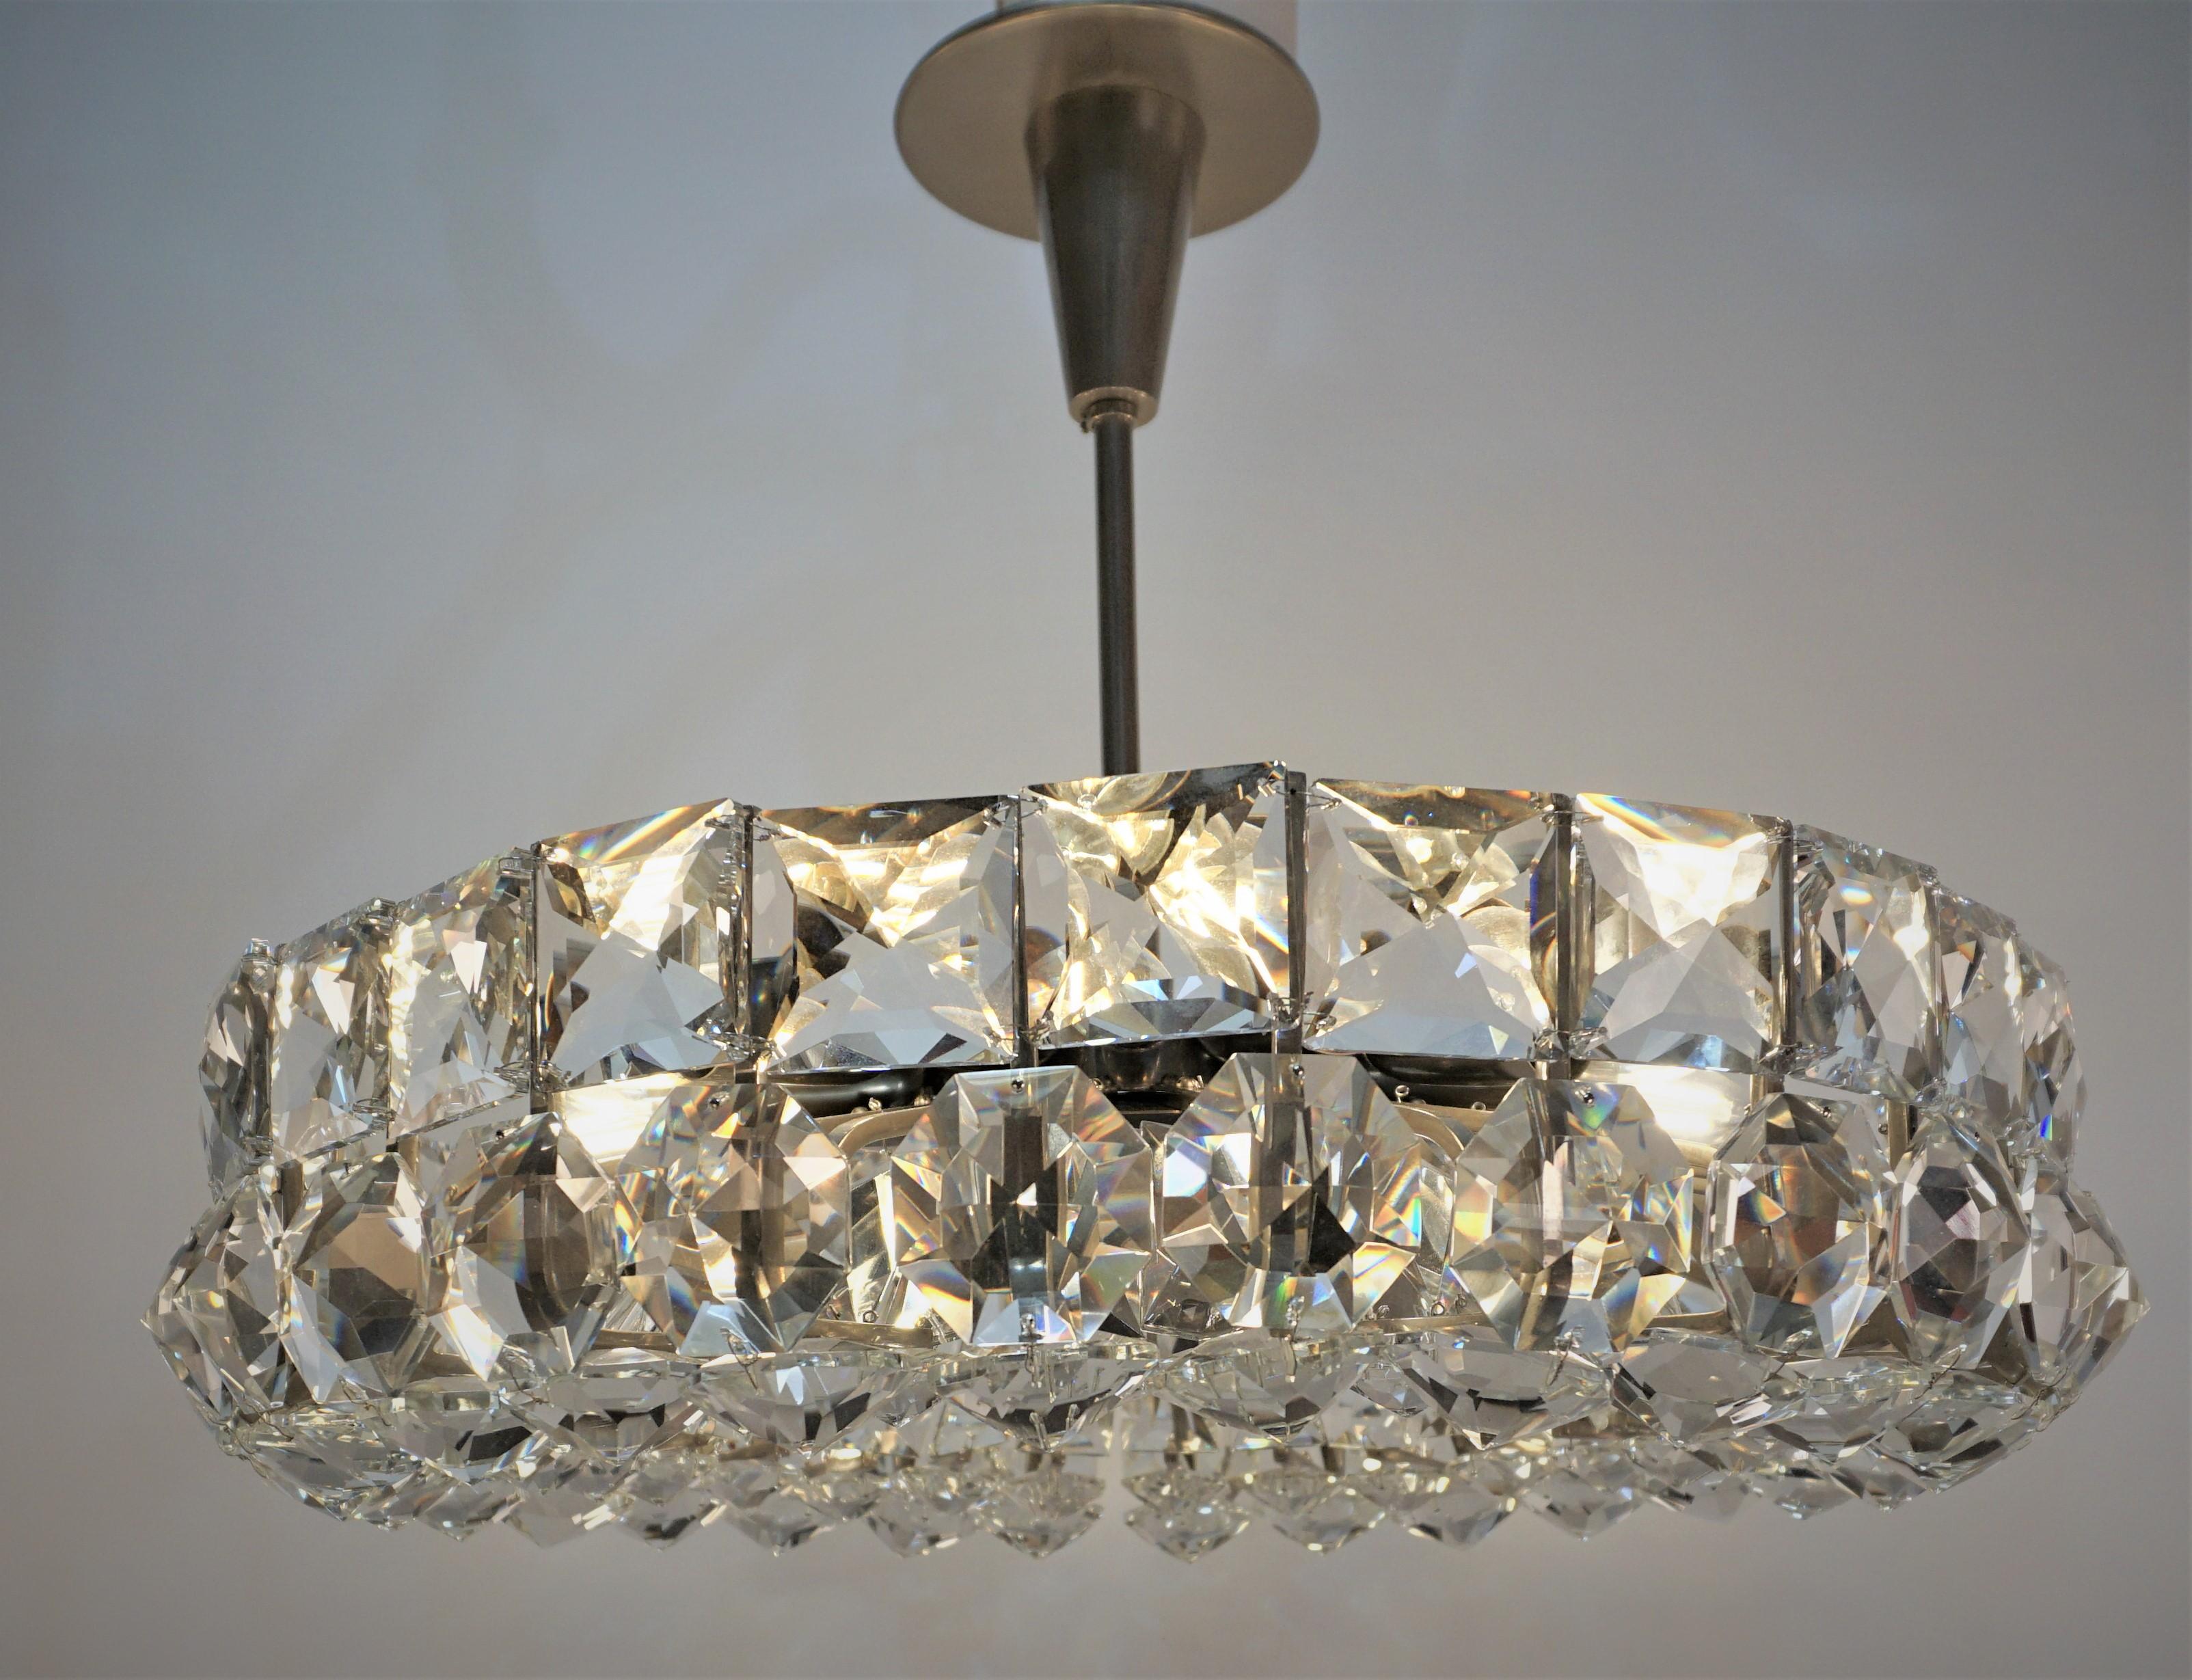 Sparkling like white large diamond 1960 crystal chandelier with nickel on bronze frame.
Sixteen lights, 60 watts max each.
Professionally rewired and ready for installation.